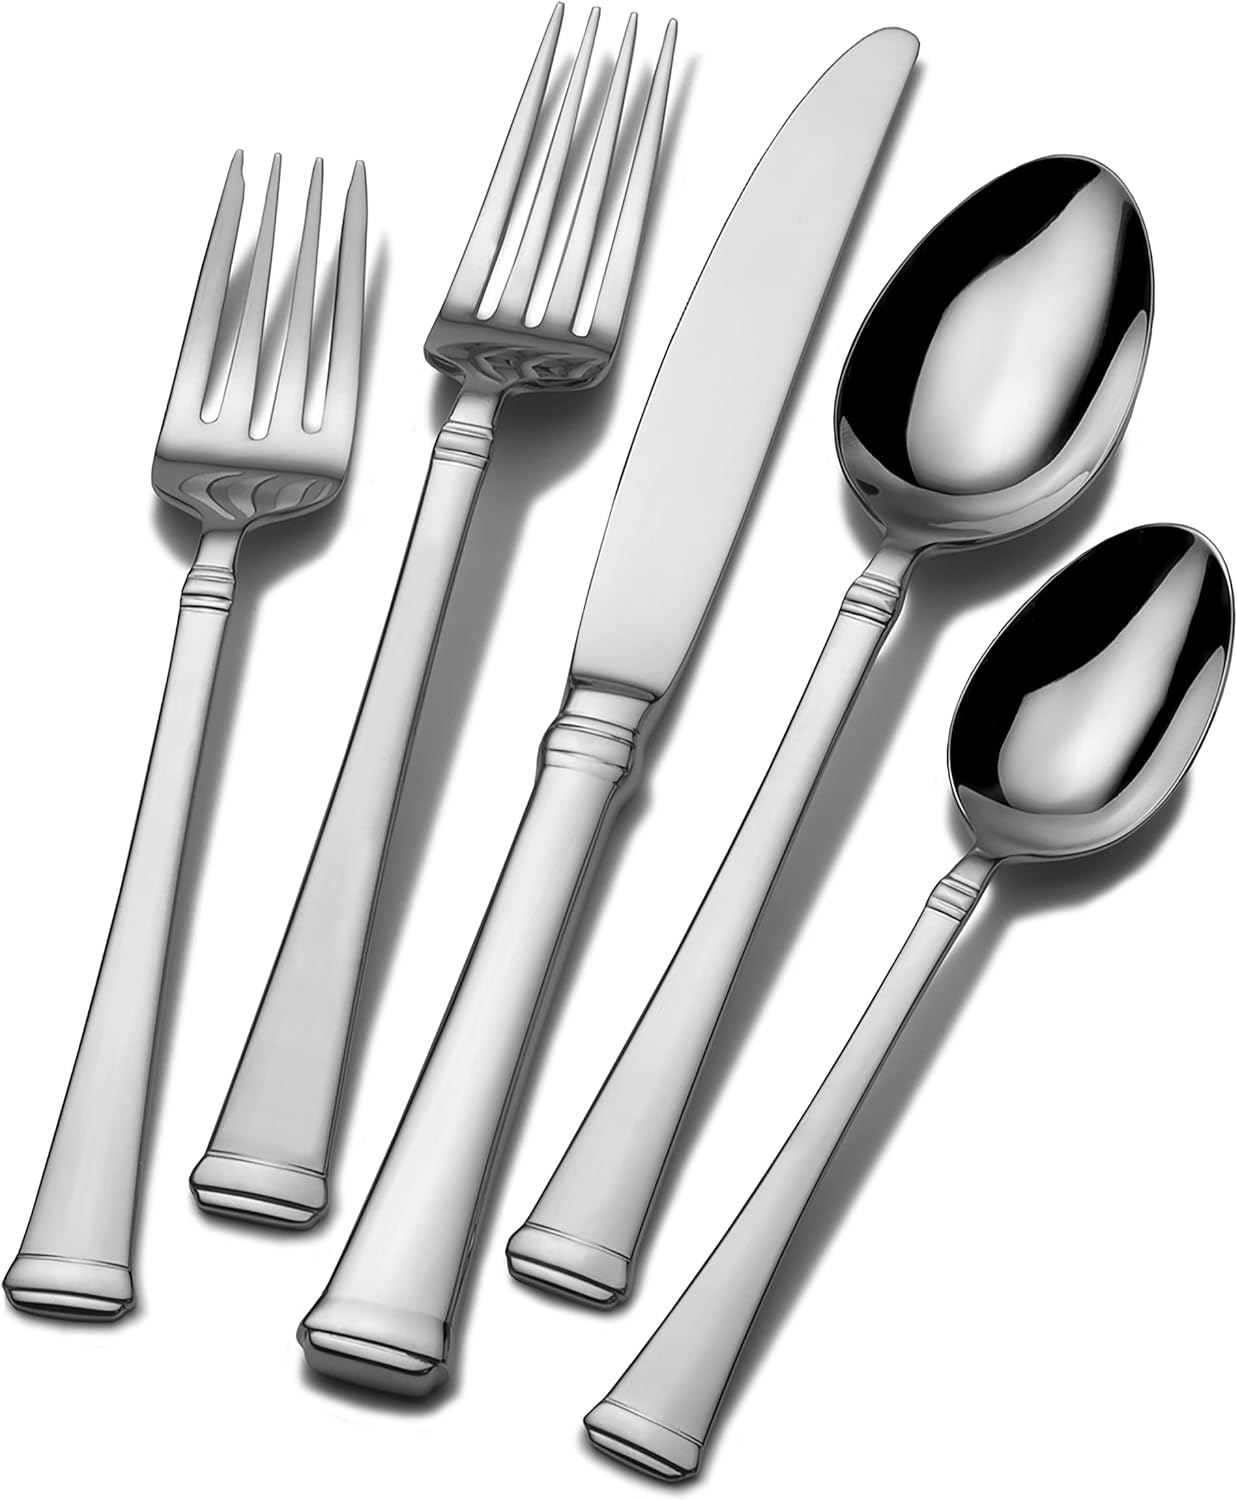 65-Piece 18/10 Stainless Steel Flatware Set with Utensil-Serving Set, Silver